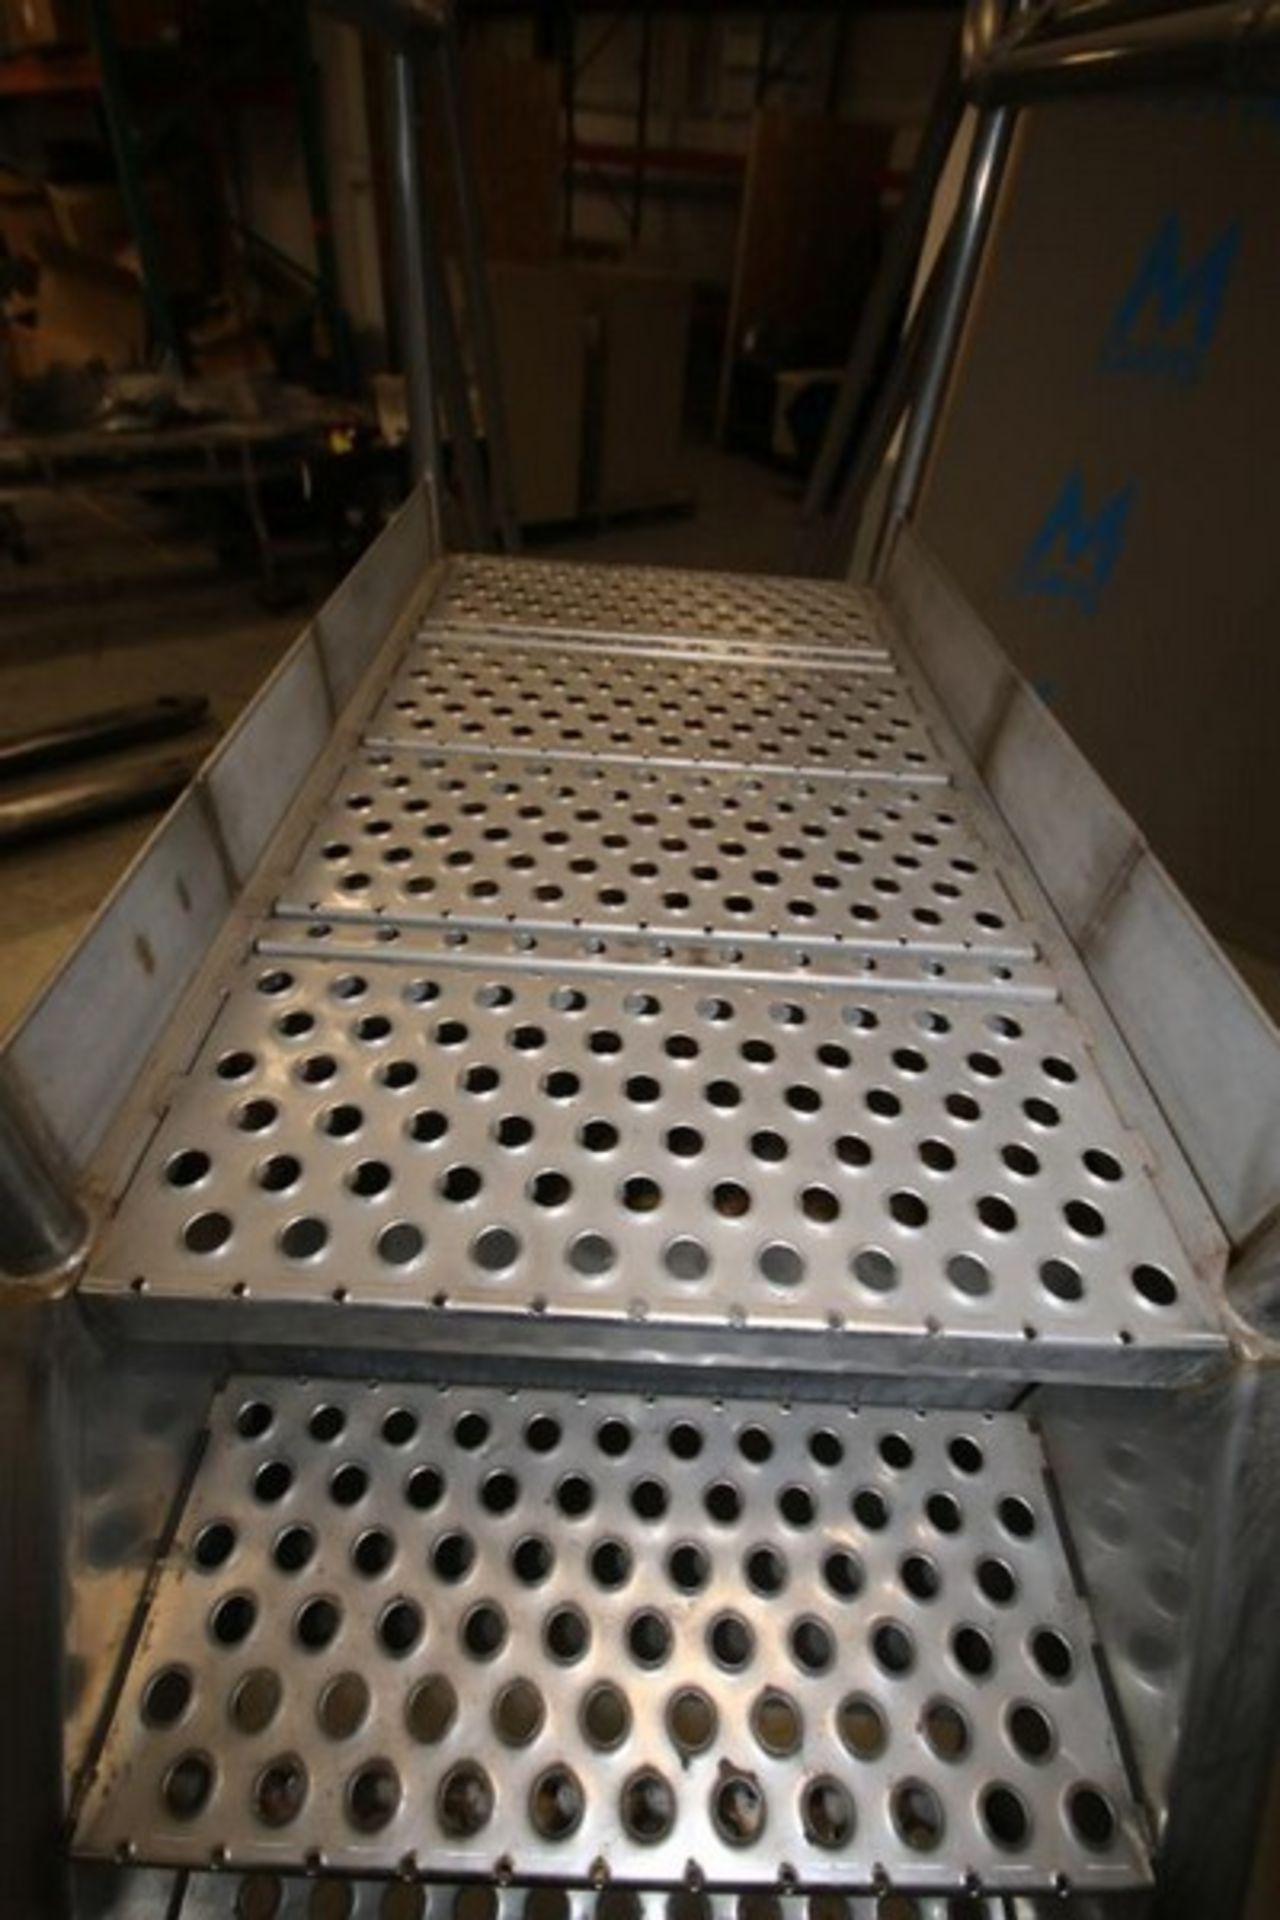 10'L x 30"W x 57"H S/S Conveyor CrossoverPlatform with Handrail & Grated Floor(INV#81394)( - Image 5 of 5